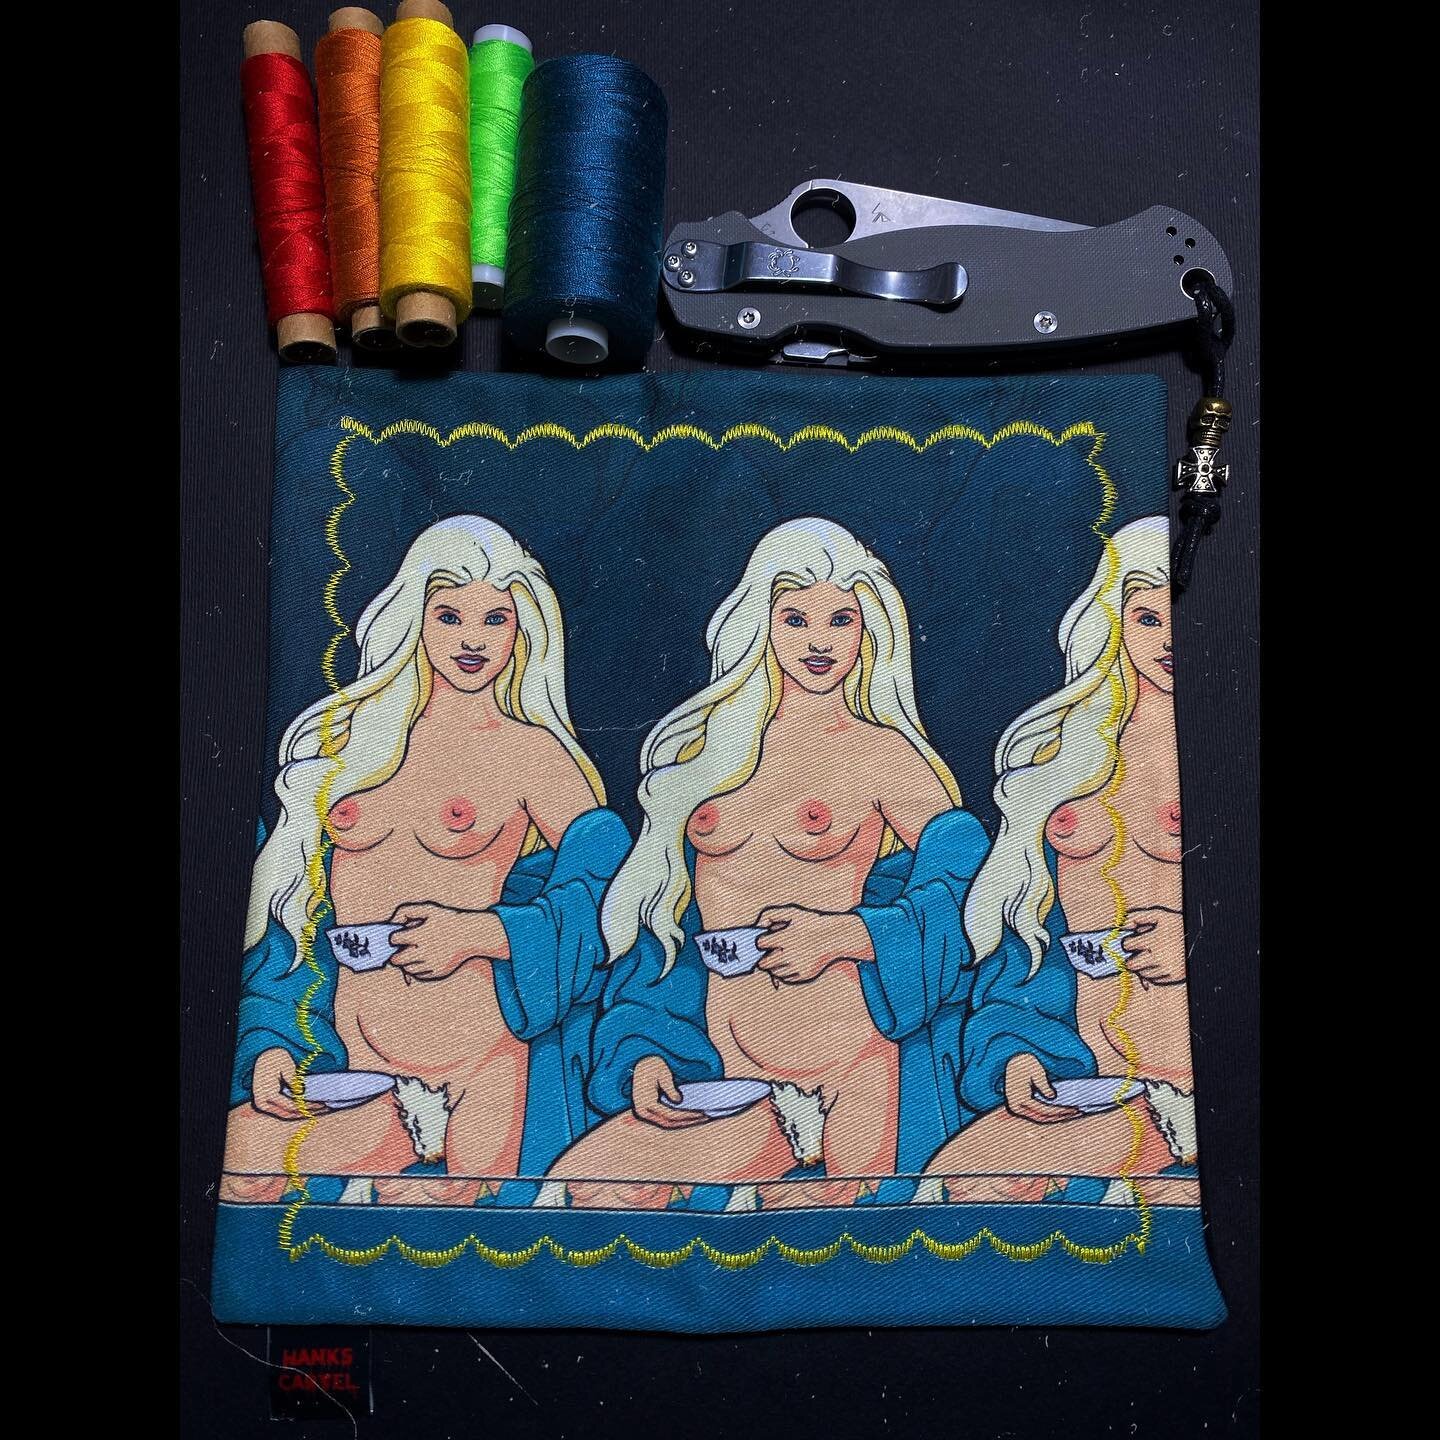 &ldquo;The Titty Twister&rdquo; available again 😁
&bull;Price: 💰21💰usd
&bull;FREE SHIPPING🌎
&bull;19,5x19,5cm (7,6in x 7,6in)
&bull;Cotton and Microfiber
&bull;Embroidery
&bull;
&bull;
&bull;
&bull;
&bull;
&bull;
&bull;
&bull;
#knife #knifeporn #